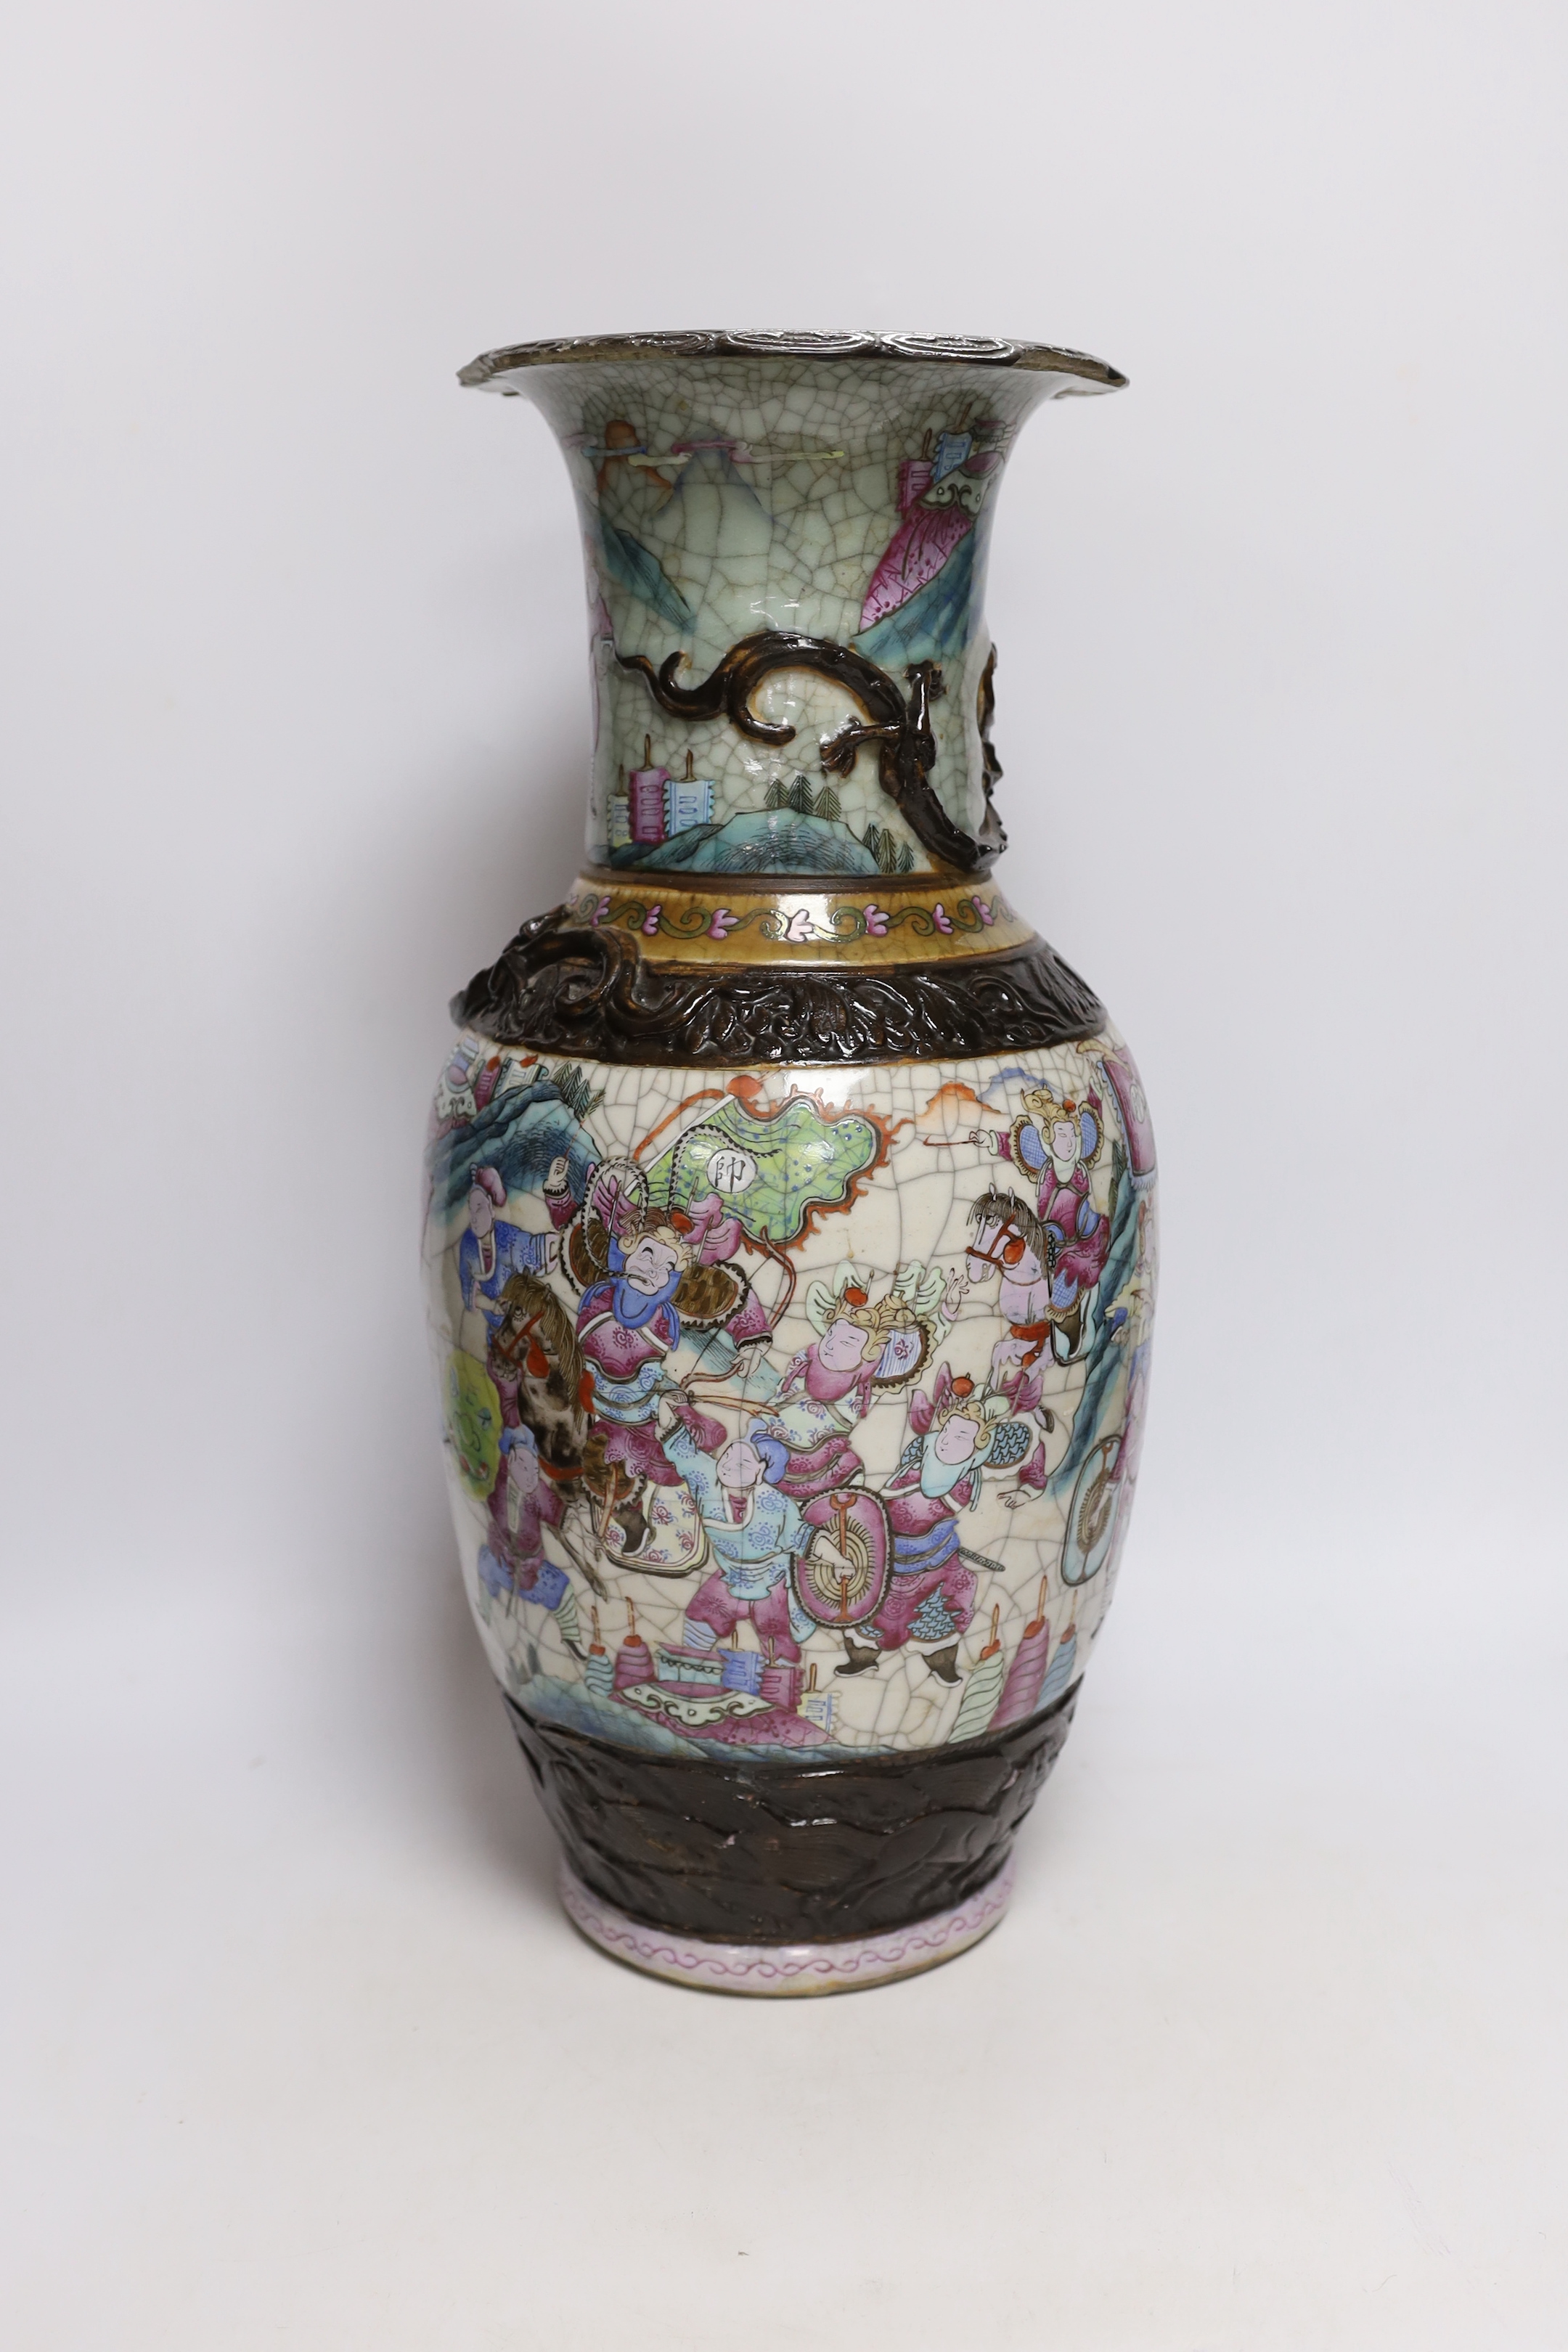 A Chinese famille rose crackle glaze 'warriors' vase, late 19th century, 46cm high, cracked